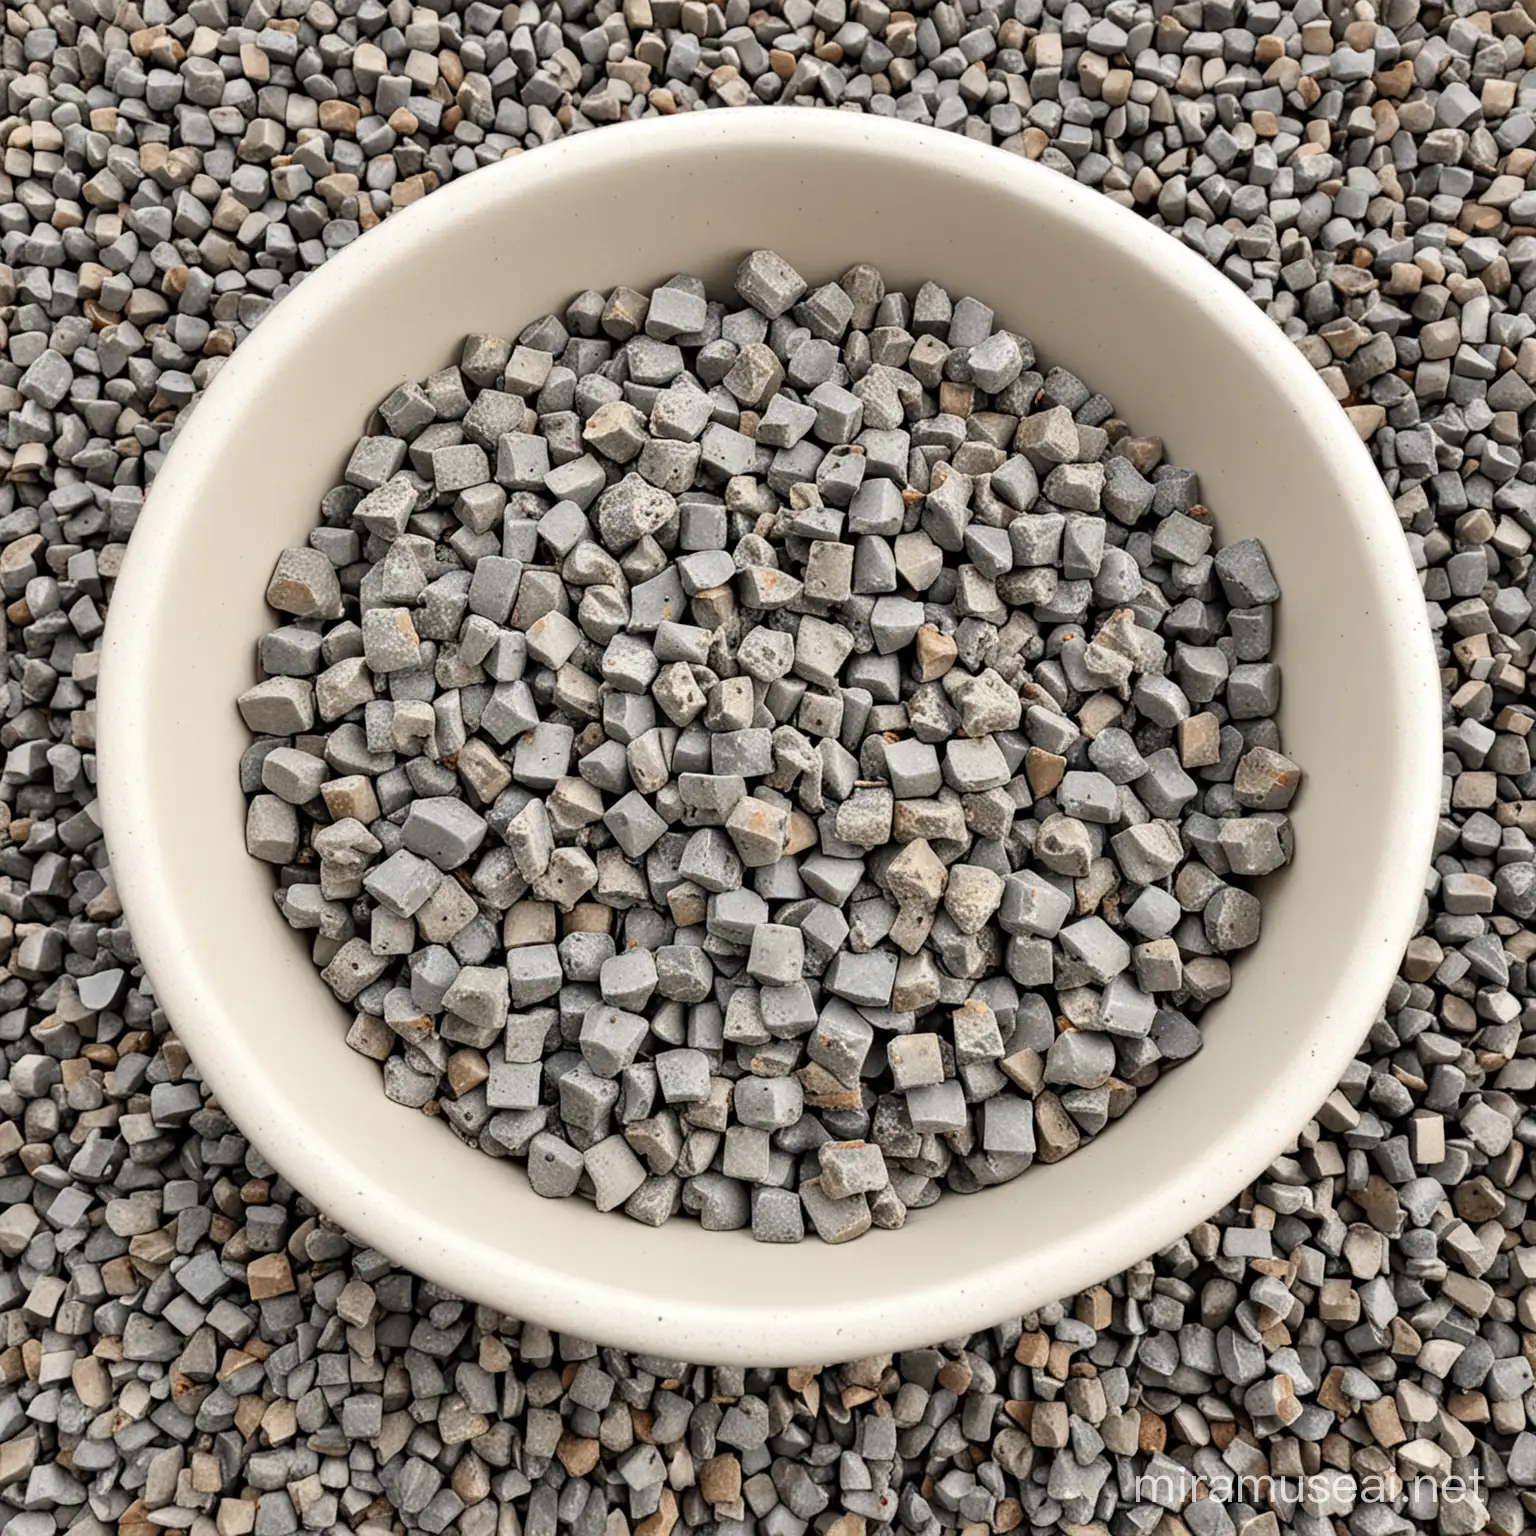 photos of Recycled Aggregate Concrete placed in a bowl
